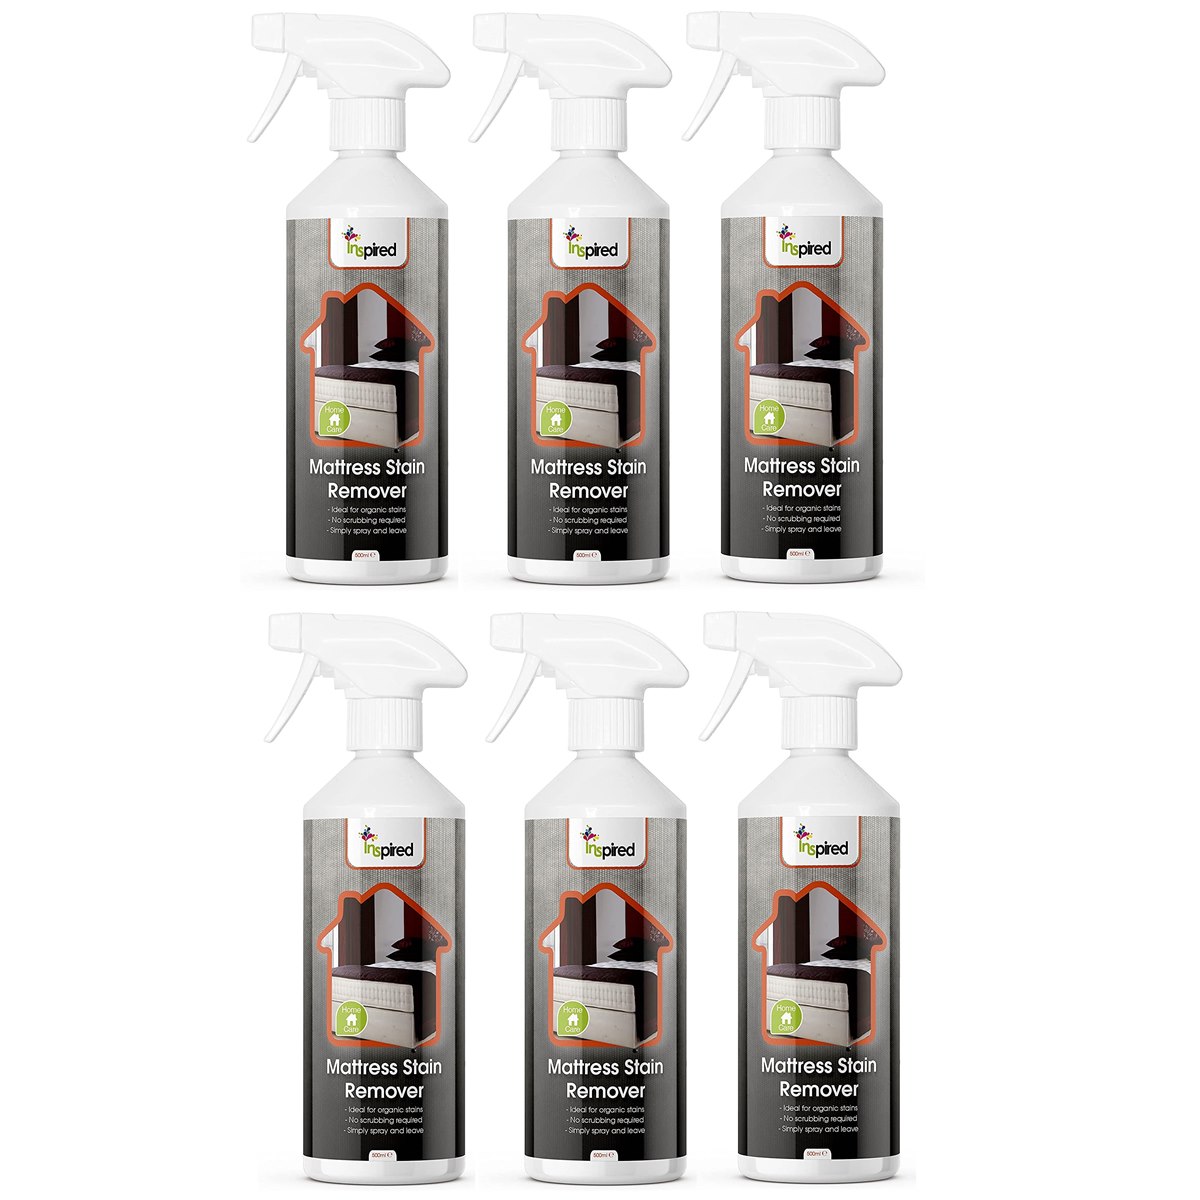 Case of 6 x Inspired Mattress Stain Remover Spray 500ml